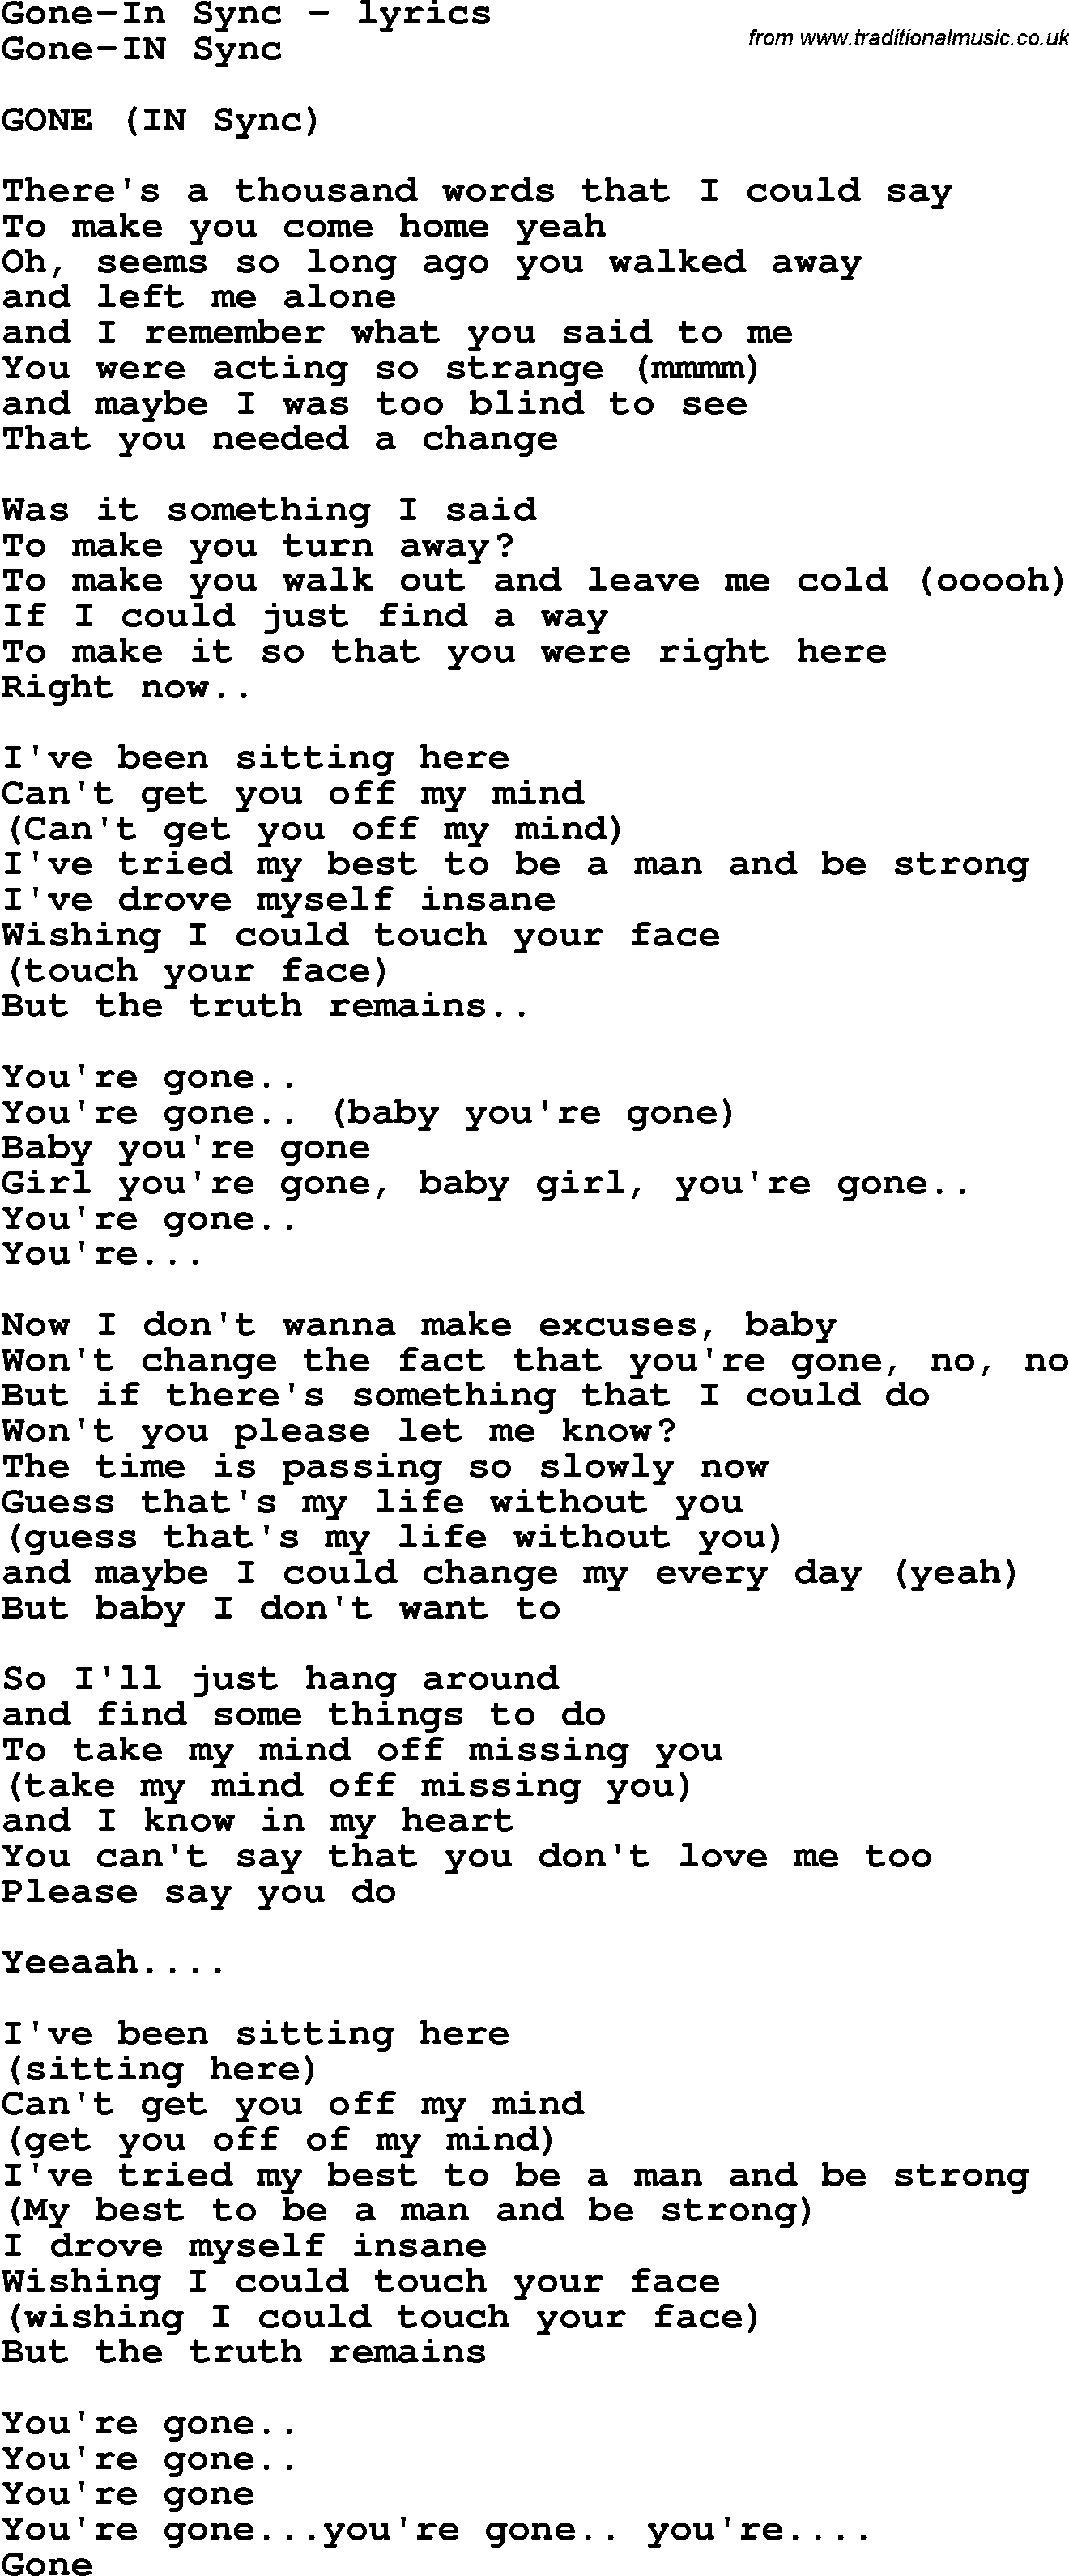 Love Song Lyrics for: Gone-In Sync